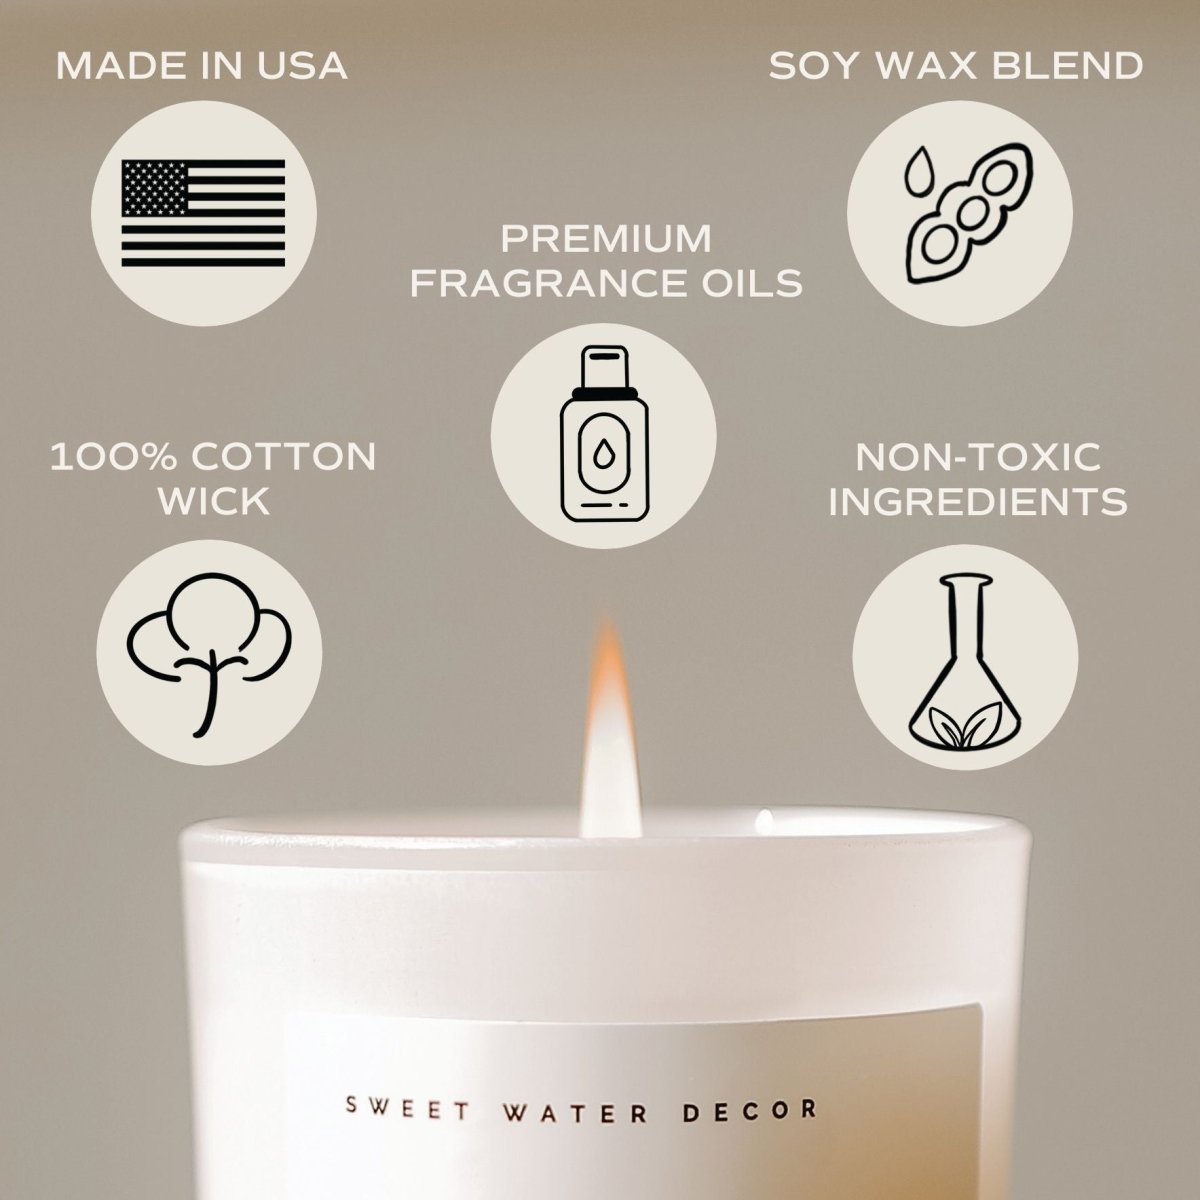 Sweet Water Decor Cashmere and Vanilla Soy Candle - White Jar - 11 oz - lily & onyx